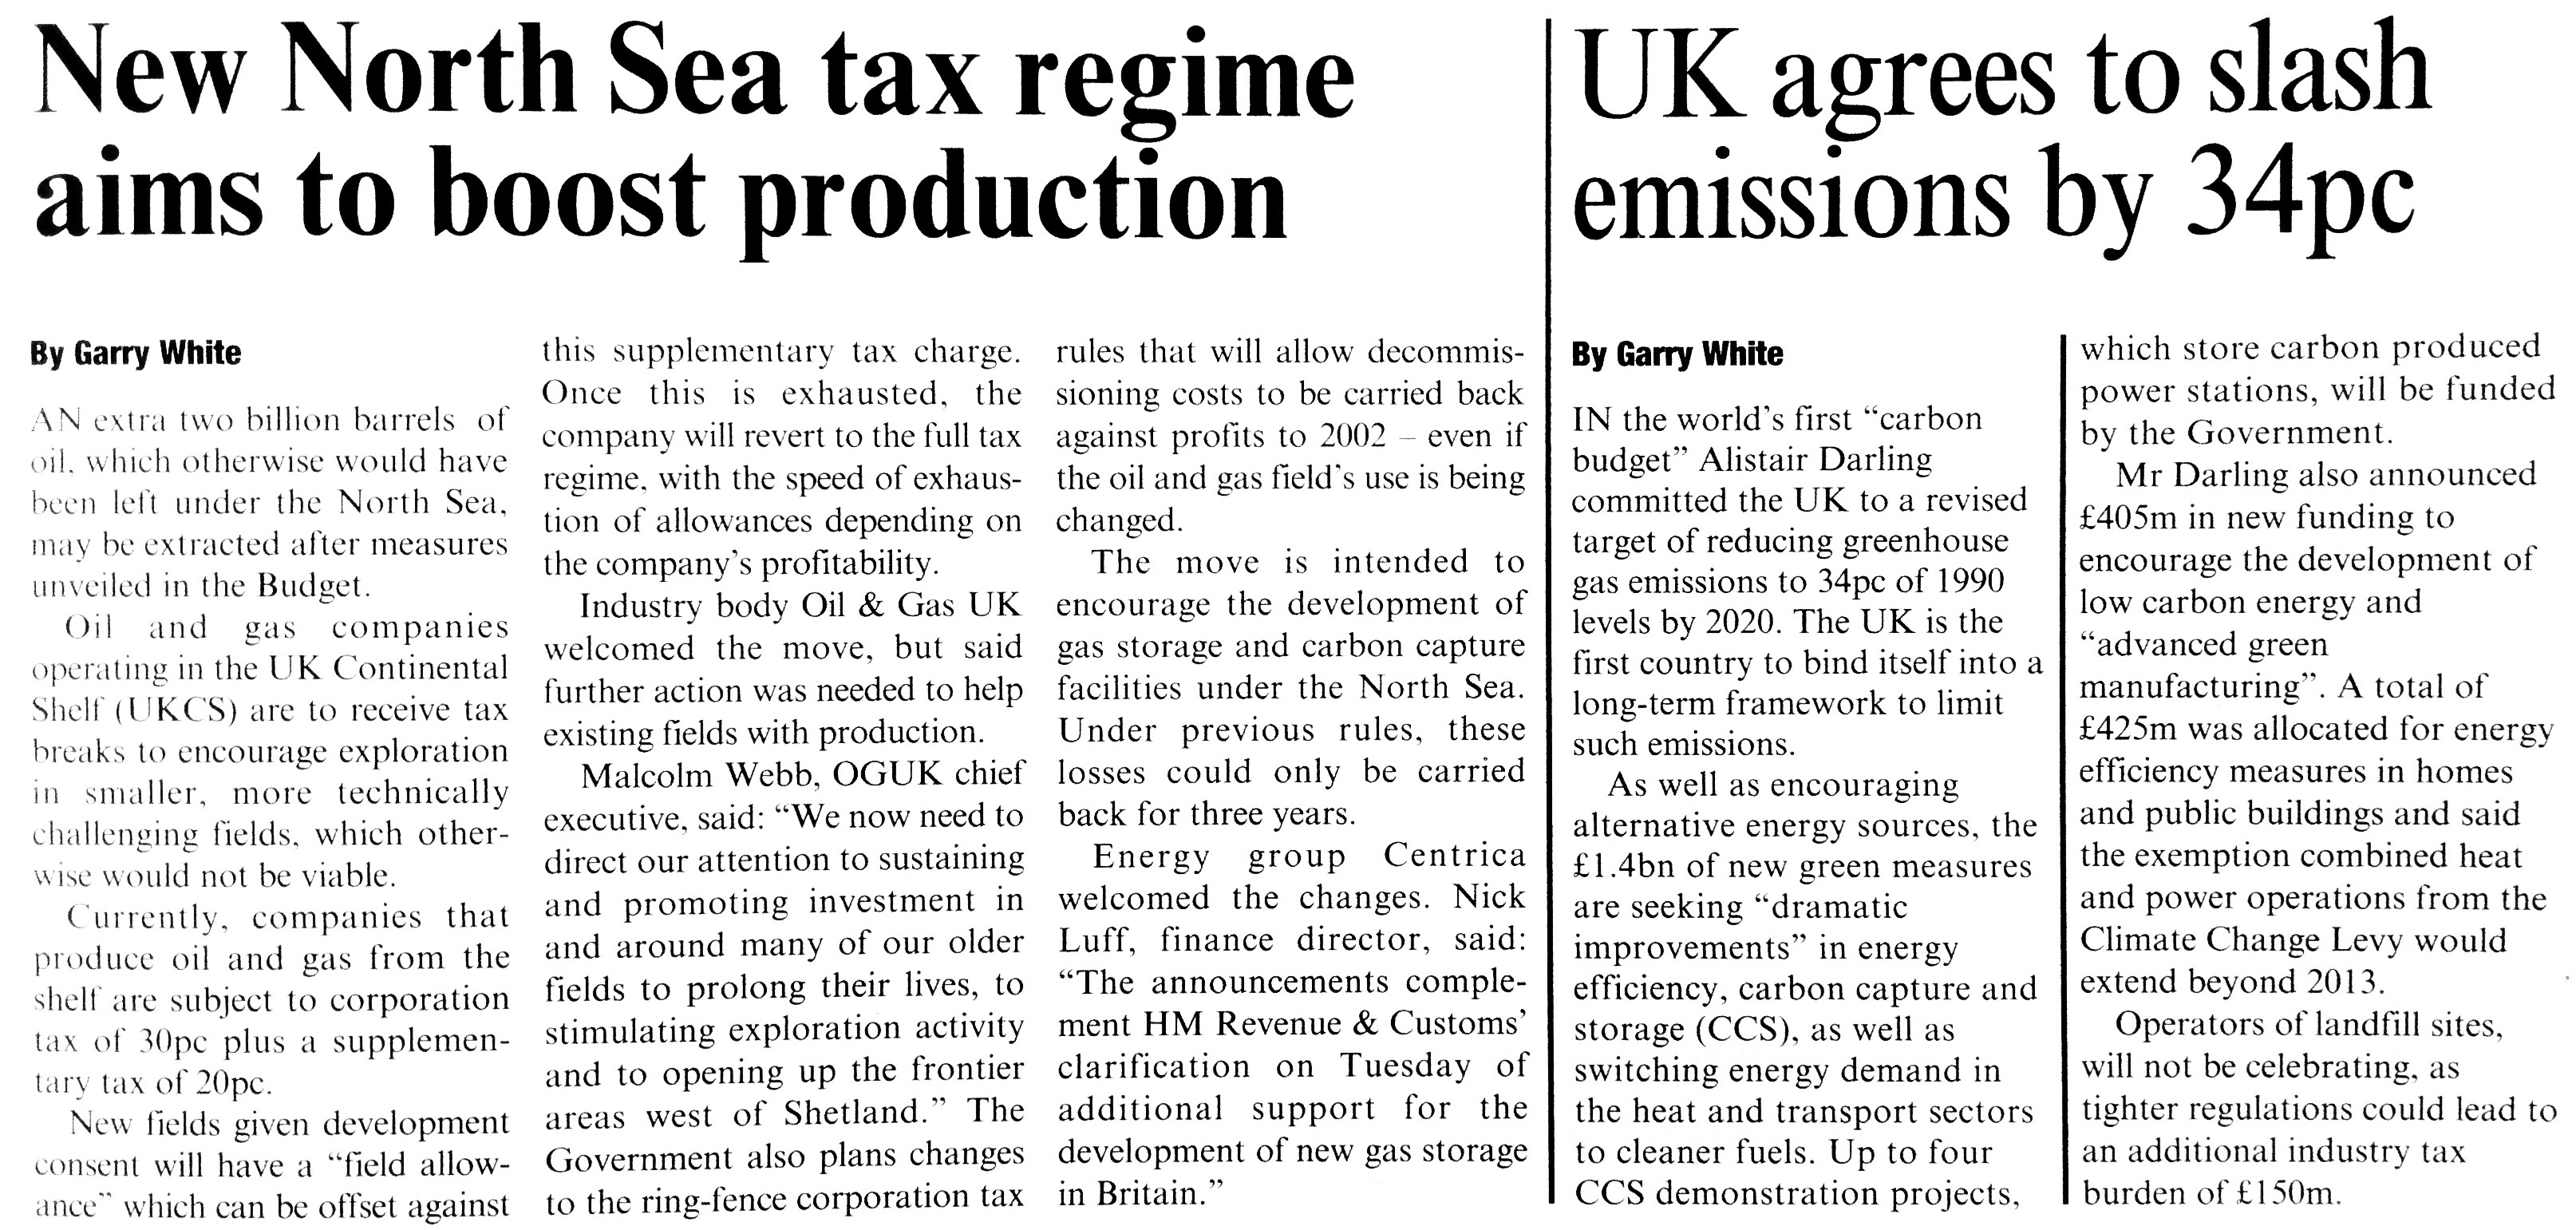 Source: The Telegraph, 22 April 2009. Copyright Telegraph Media Group Limited 2009.